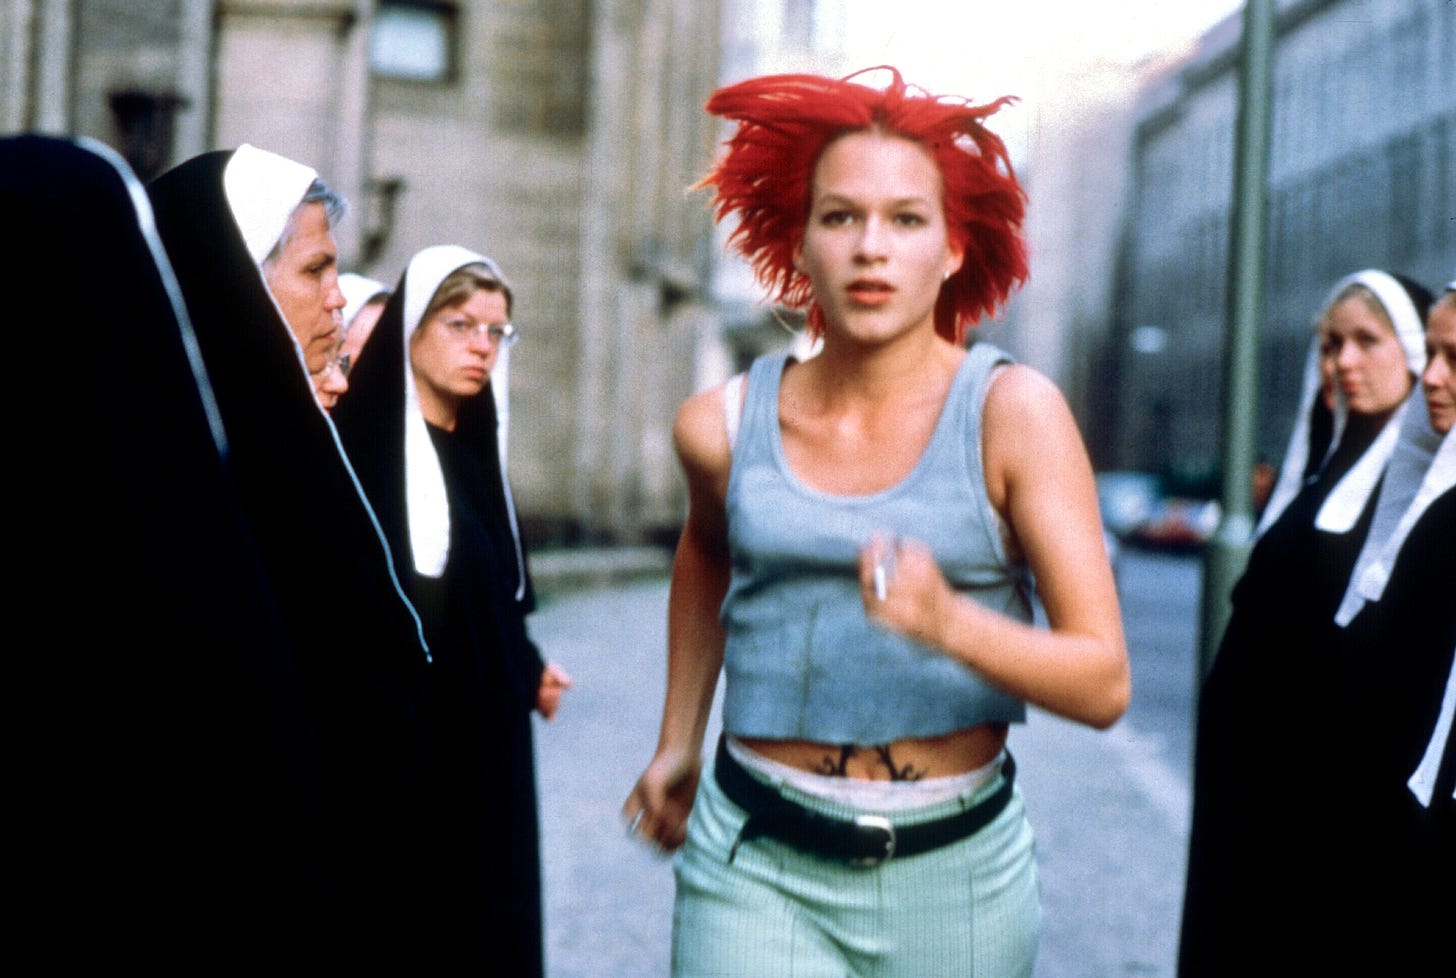 A young woman with red hair runs between a group of nuns